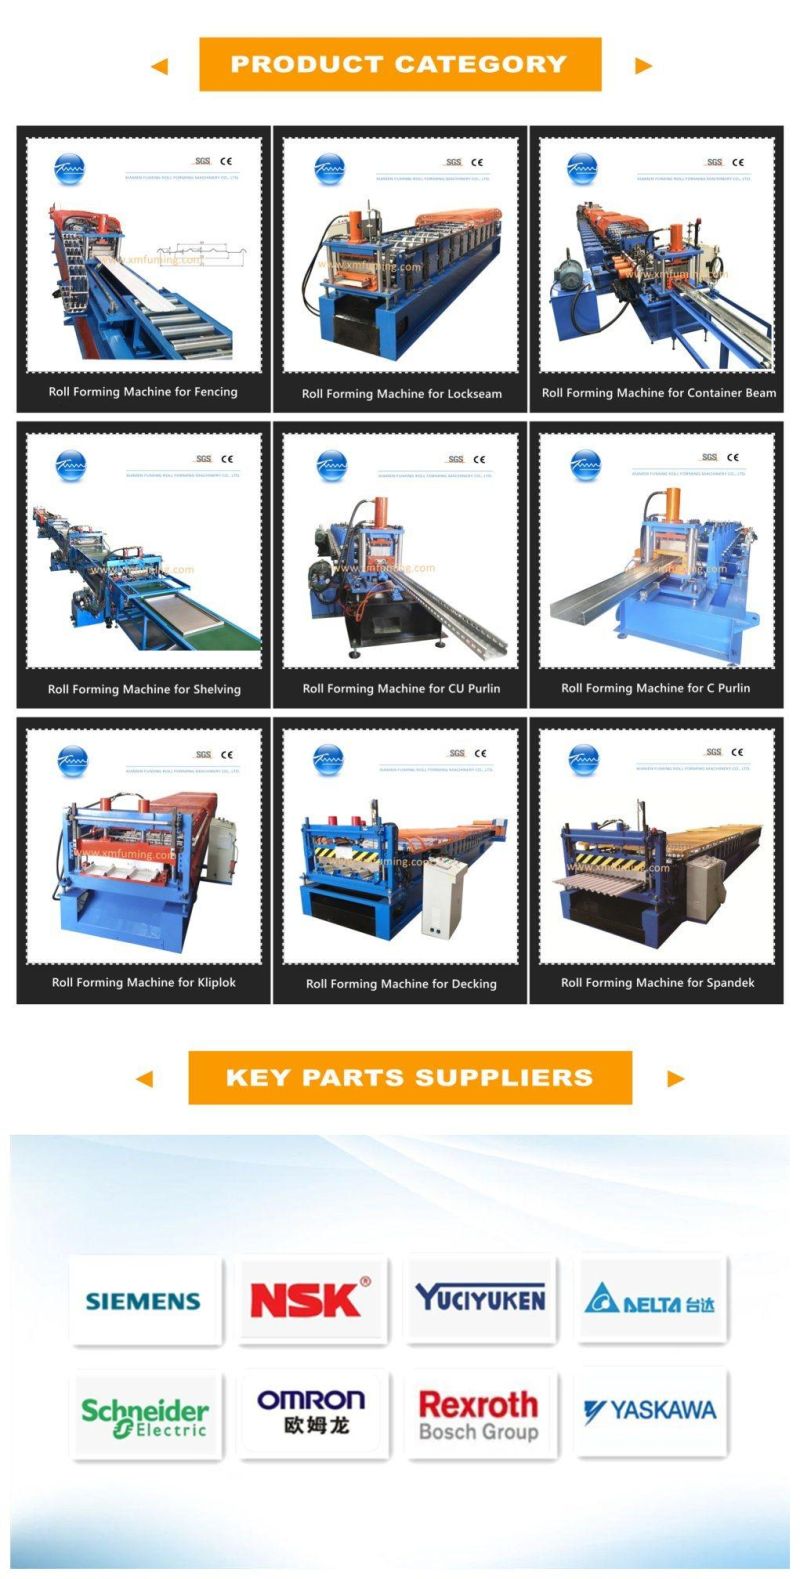 China 40gp New Fuming Container Xiamen Rainspout Roof and Tile Roll Forming Machinery Rollformer